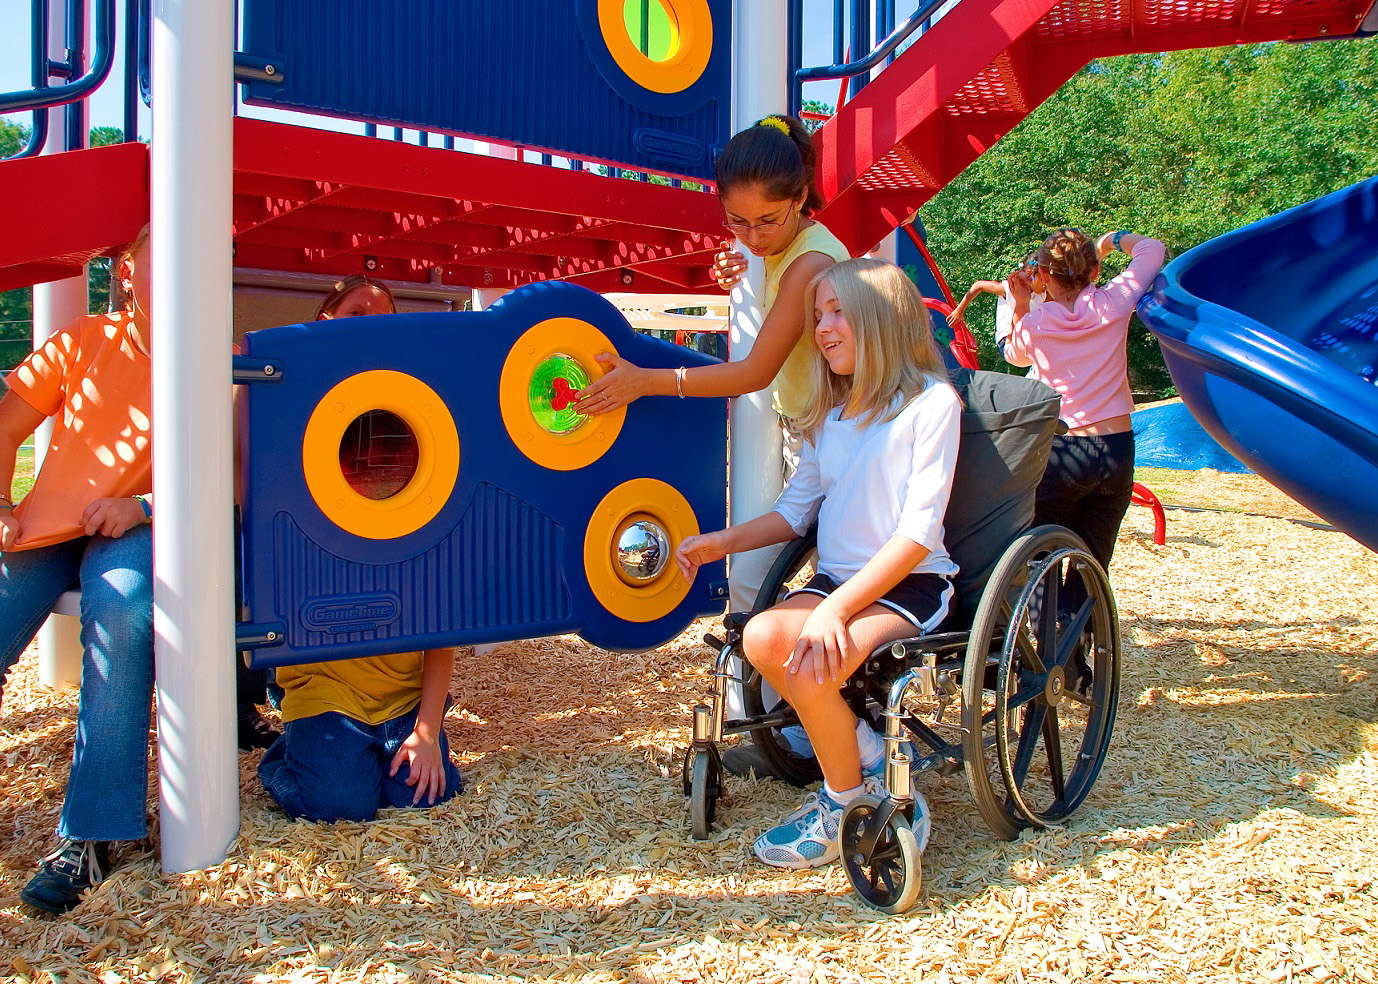 Child in wheelchair interacting with interpretive music panel.